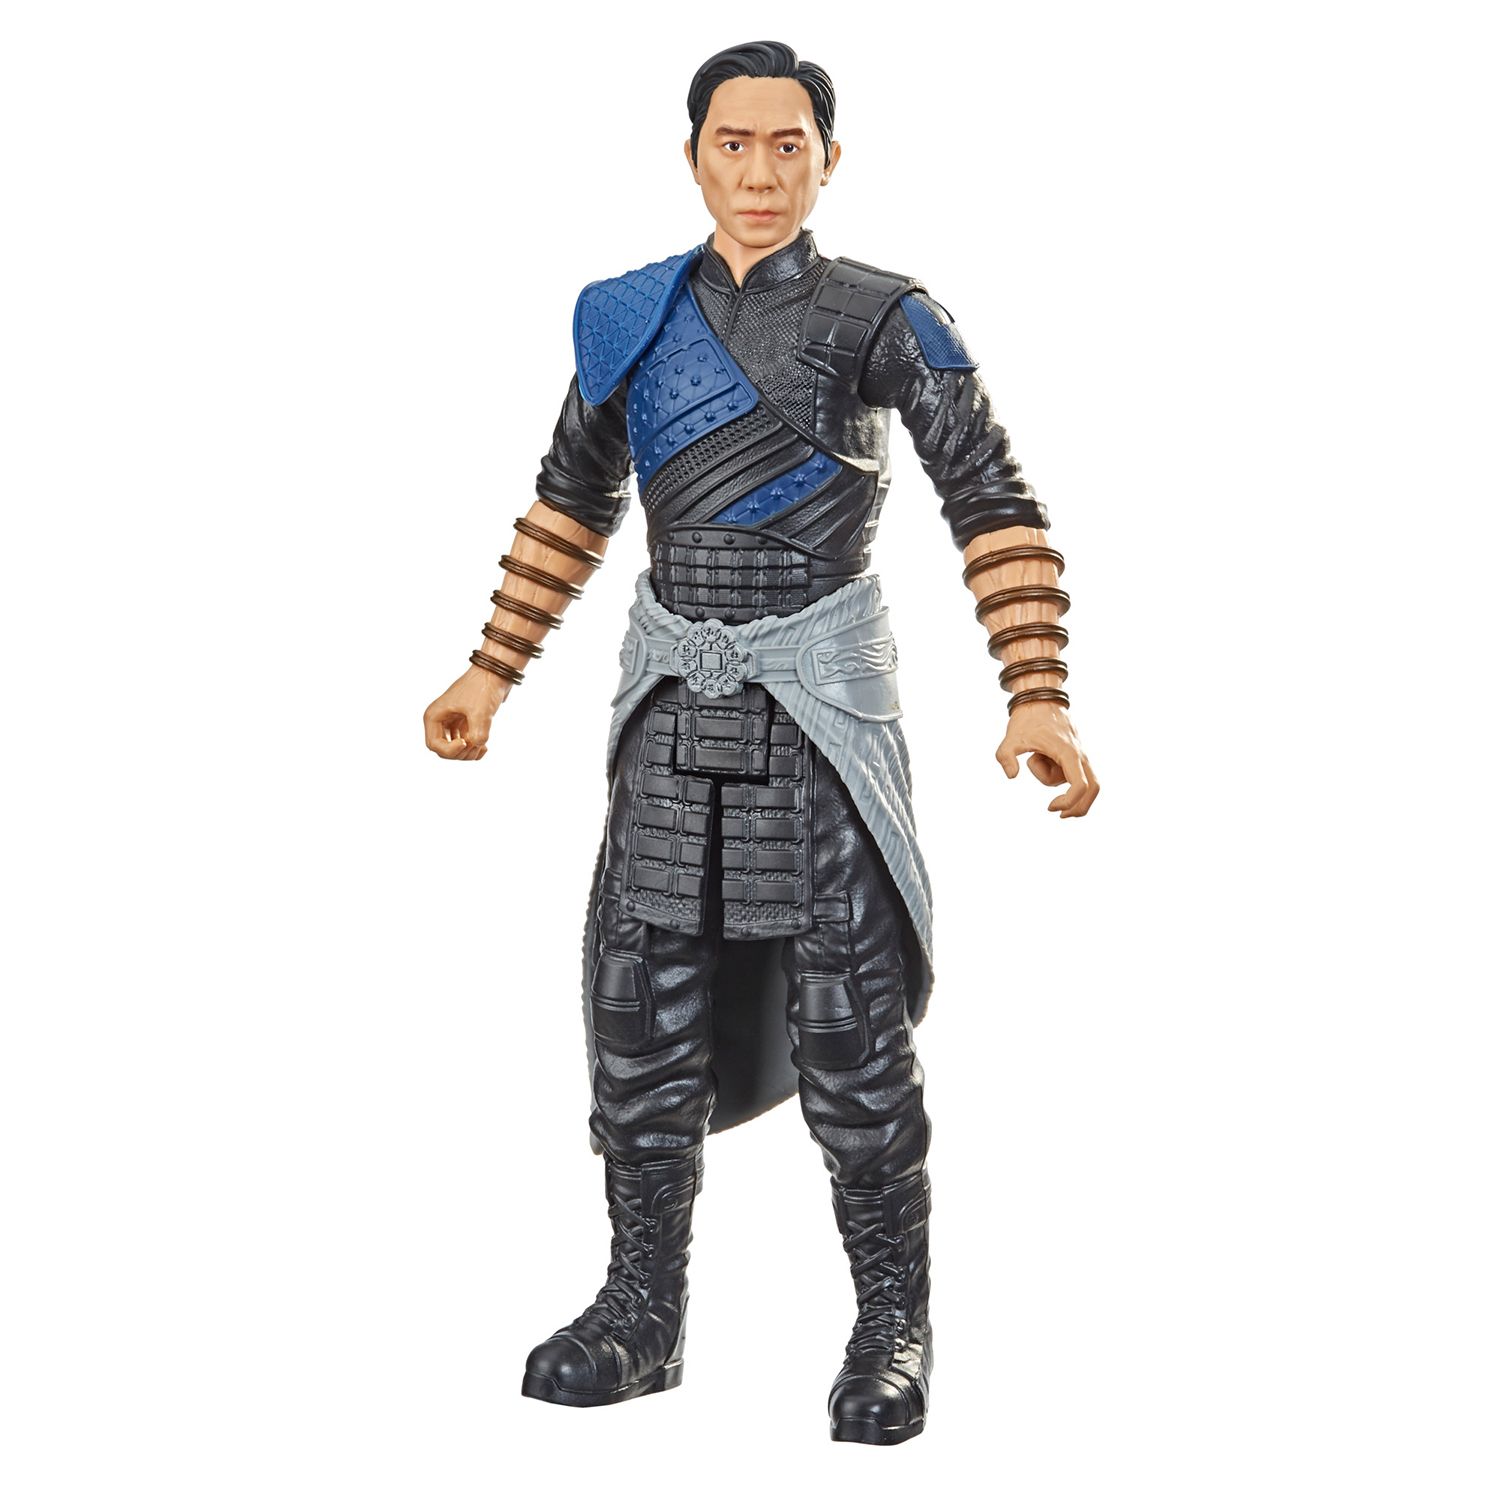 Image for Hasbro Marvel Titan Hero Series Shang-Chi and the Legend of the Ten Rings Wenwu by at Kohl's.